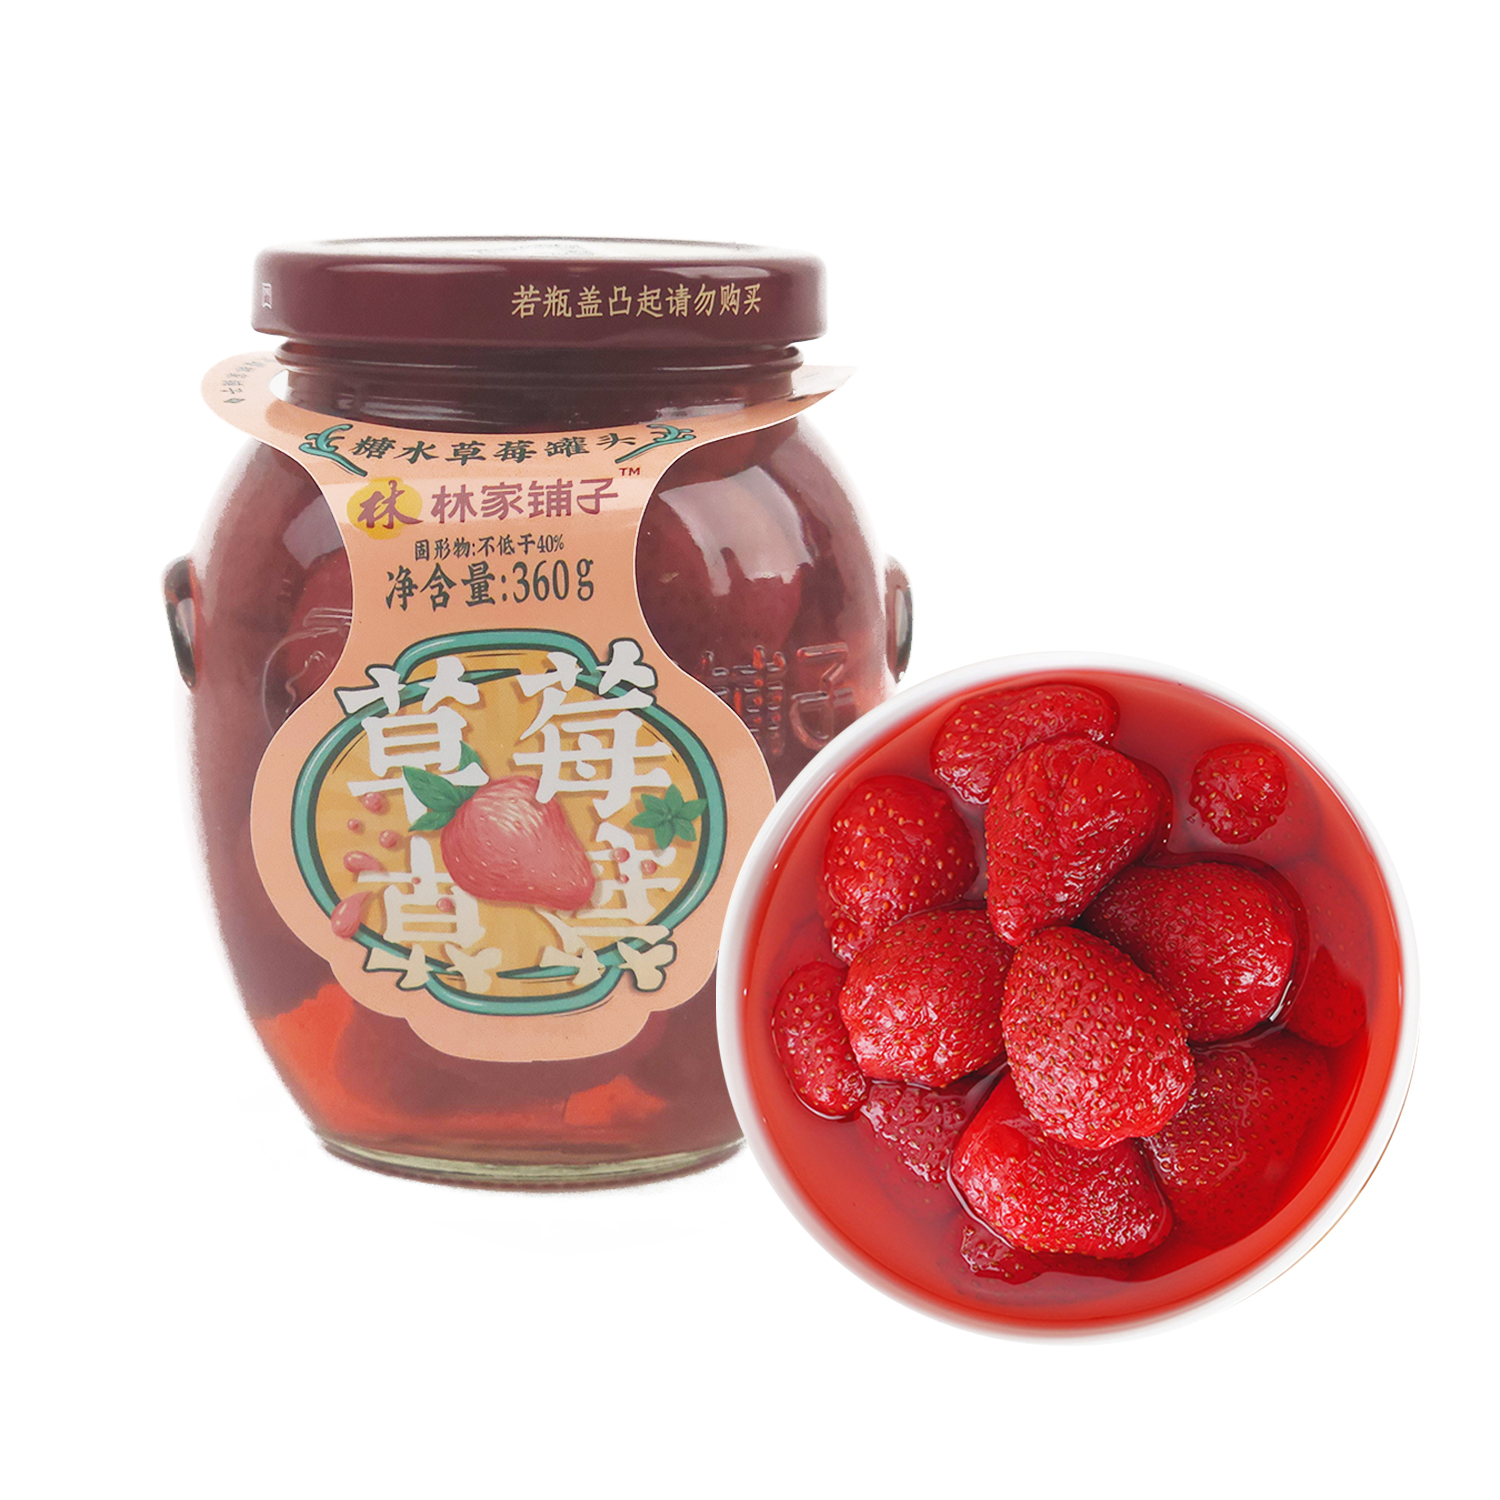 Leasun Food Canned Strawberry in Syrup 360g-eBest-Nuts & Dried Fruit,Snacks & Confectionery